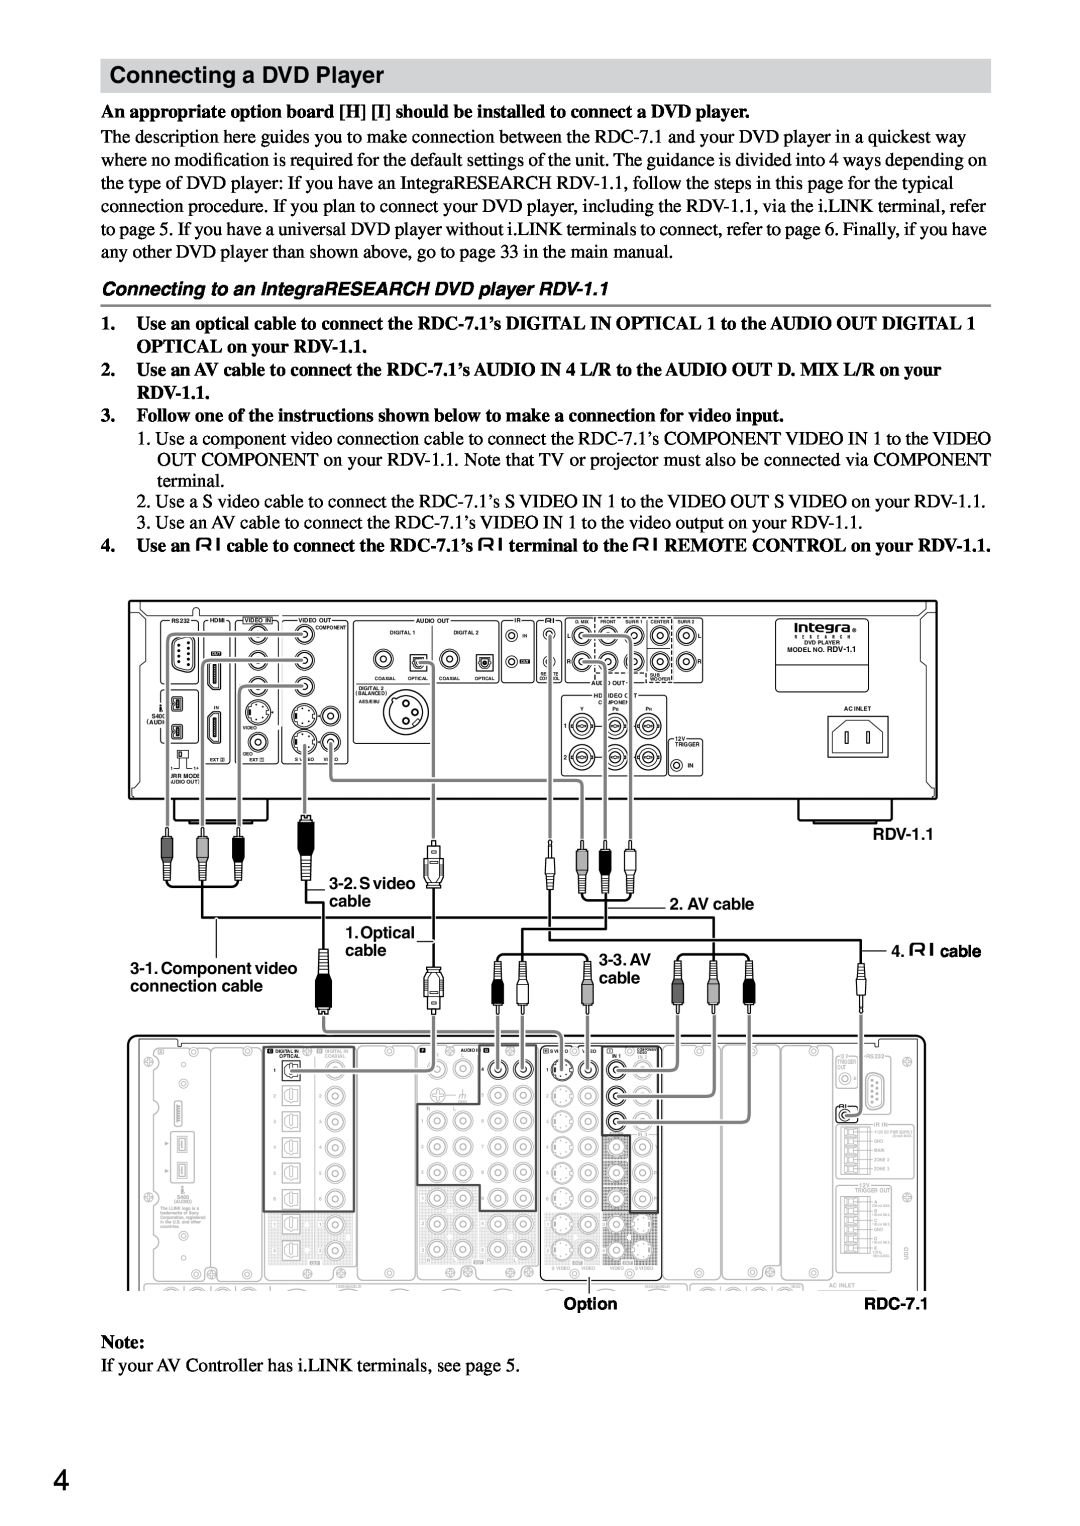 Integra RDC-7.1 instruction manual Connecting a DVD Player 